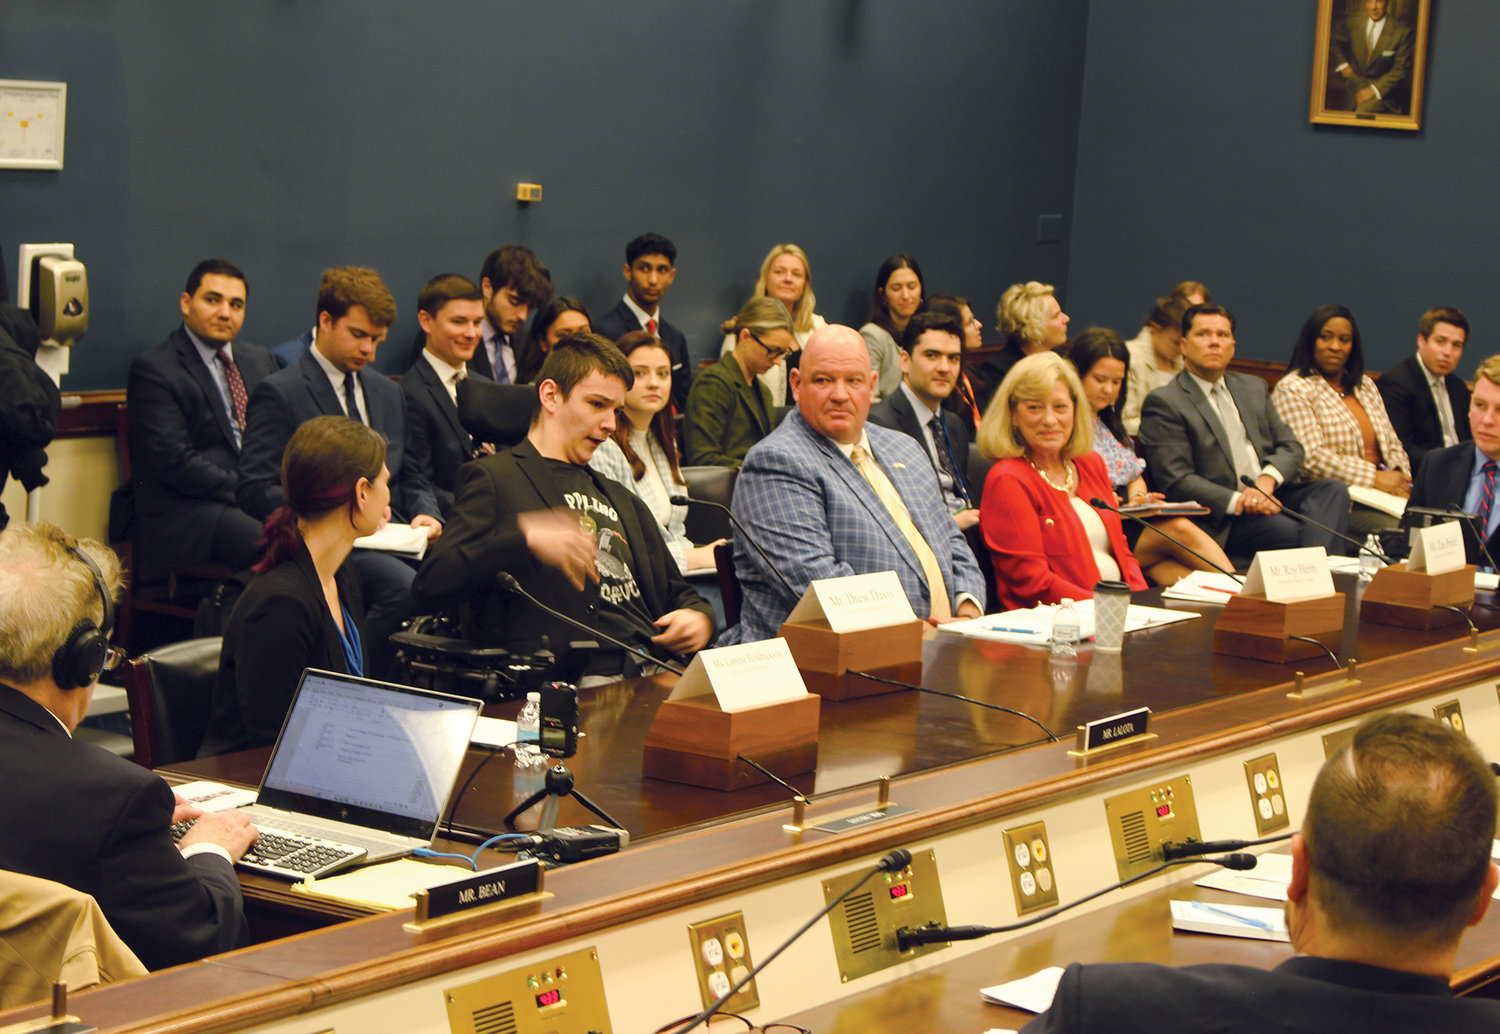 Testifying before the House Committee on Small Business’ "From Nothing to Something: The Story of the American Dream” are (from left) Corinne Hendrickson, Drew Davis, Roy Heim, and Zan Prince.